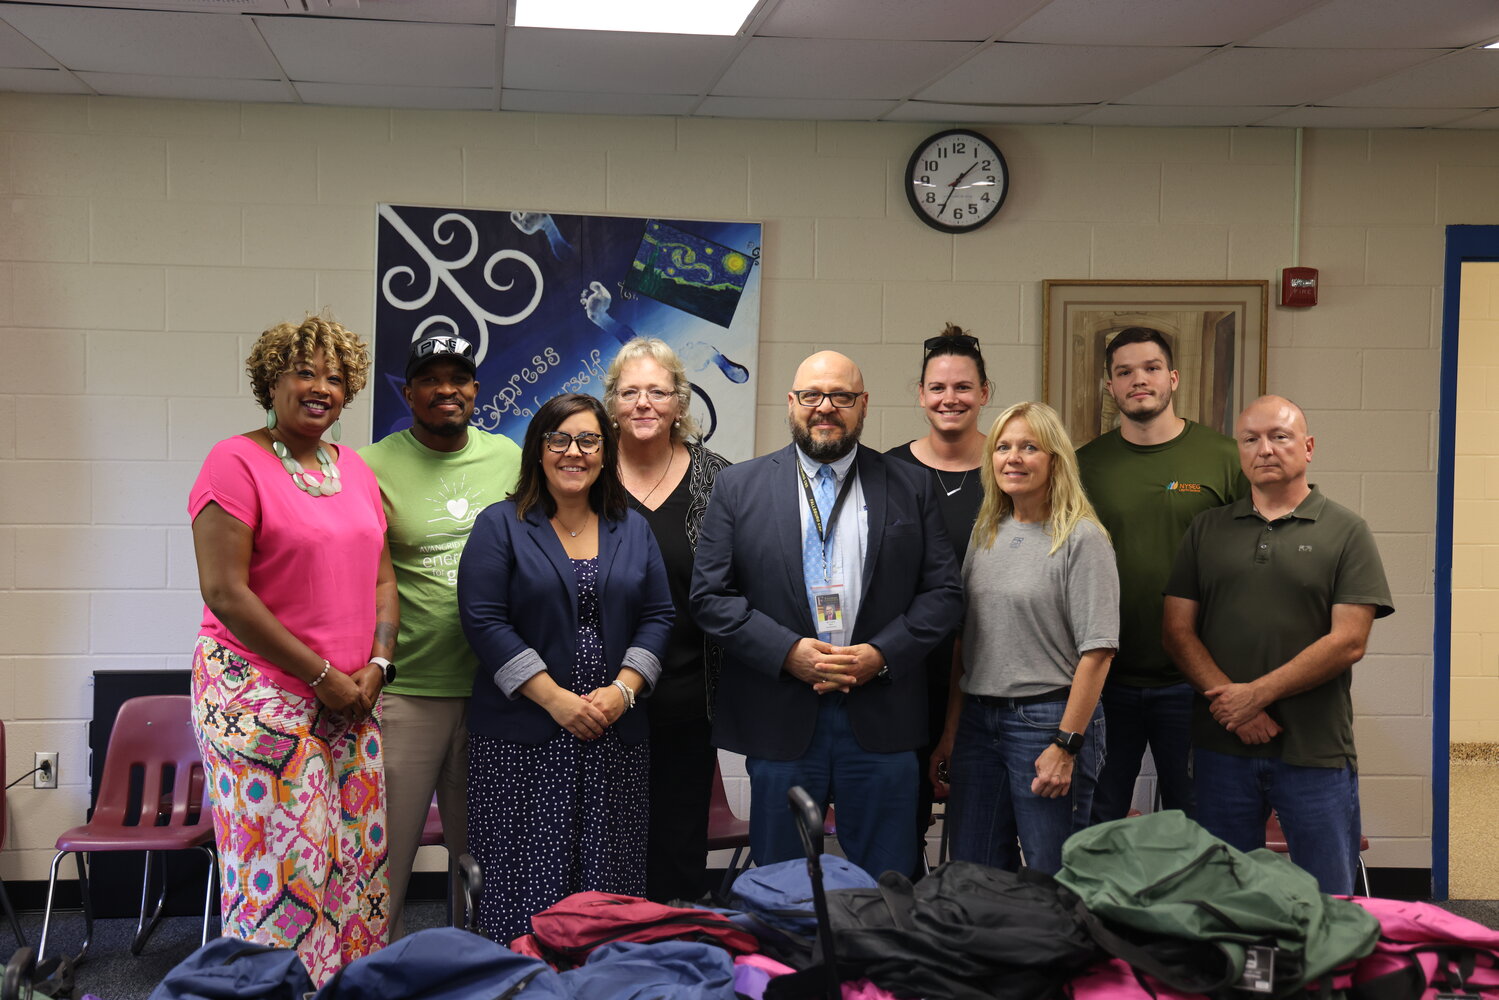 Providing backpacks for kids in Fallsburg. Pictured are ATI’s Children and Family Services Program Manager Akilah Sutphin, left; NYSEG’s Program Manager, Uthman Aziz; Fallsburg’s Director of Pupil Personnel Services Leighanne Russell; Assistant Superintendent for Curriculum and Instruction Sally Sharkey; Superintendent Dr. Ivan Katz; NYSEG’s Gabi Matthews; Dena Schulte; Travis Kelly; and NYSEG Regional Manager John Schneck.